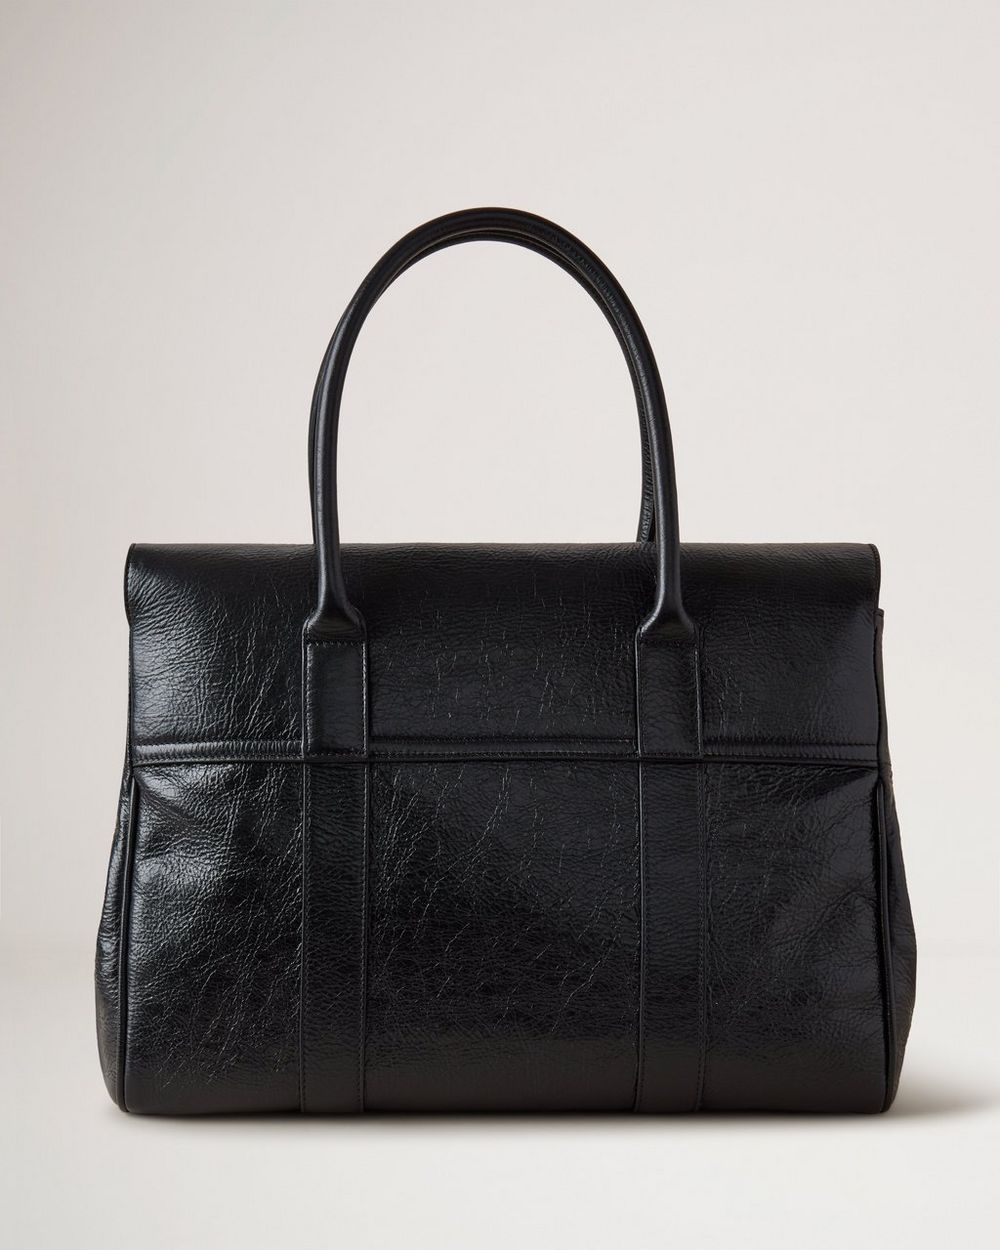 Bayswater | Black High Shine Calf Leather | Women | Mulberry